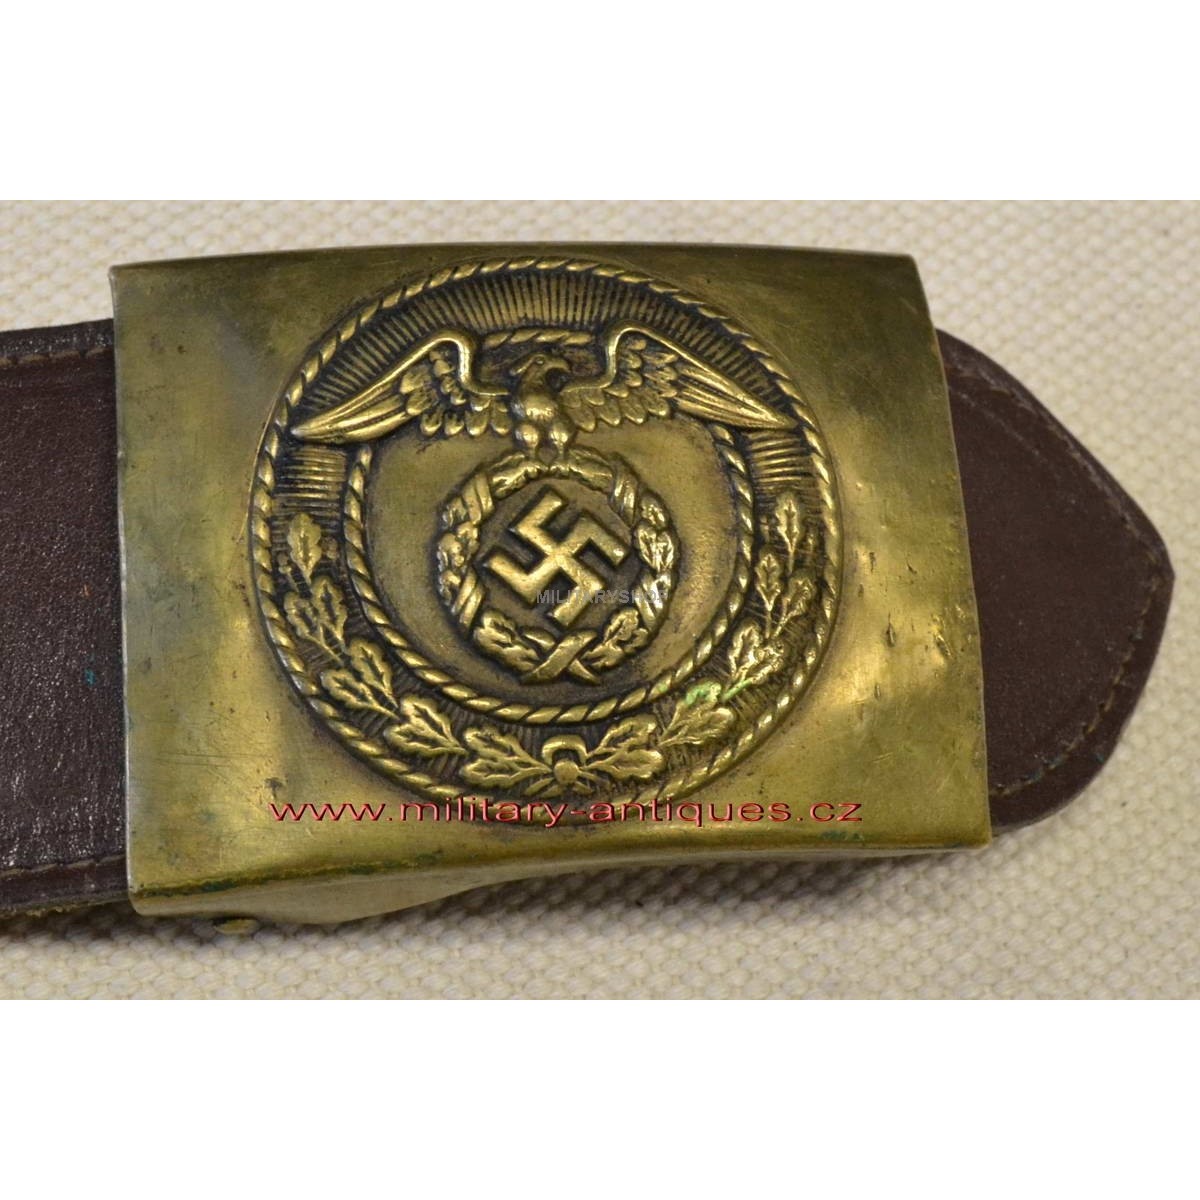 German WW2 SA brass buckle with leather brown belt